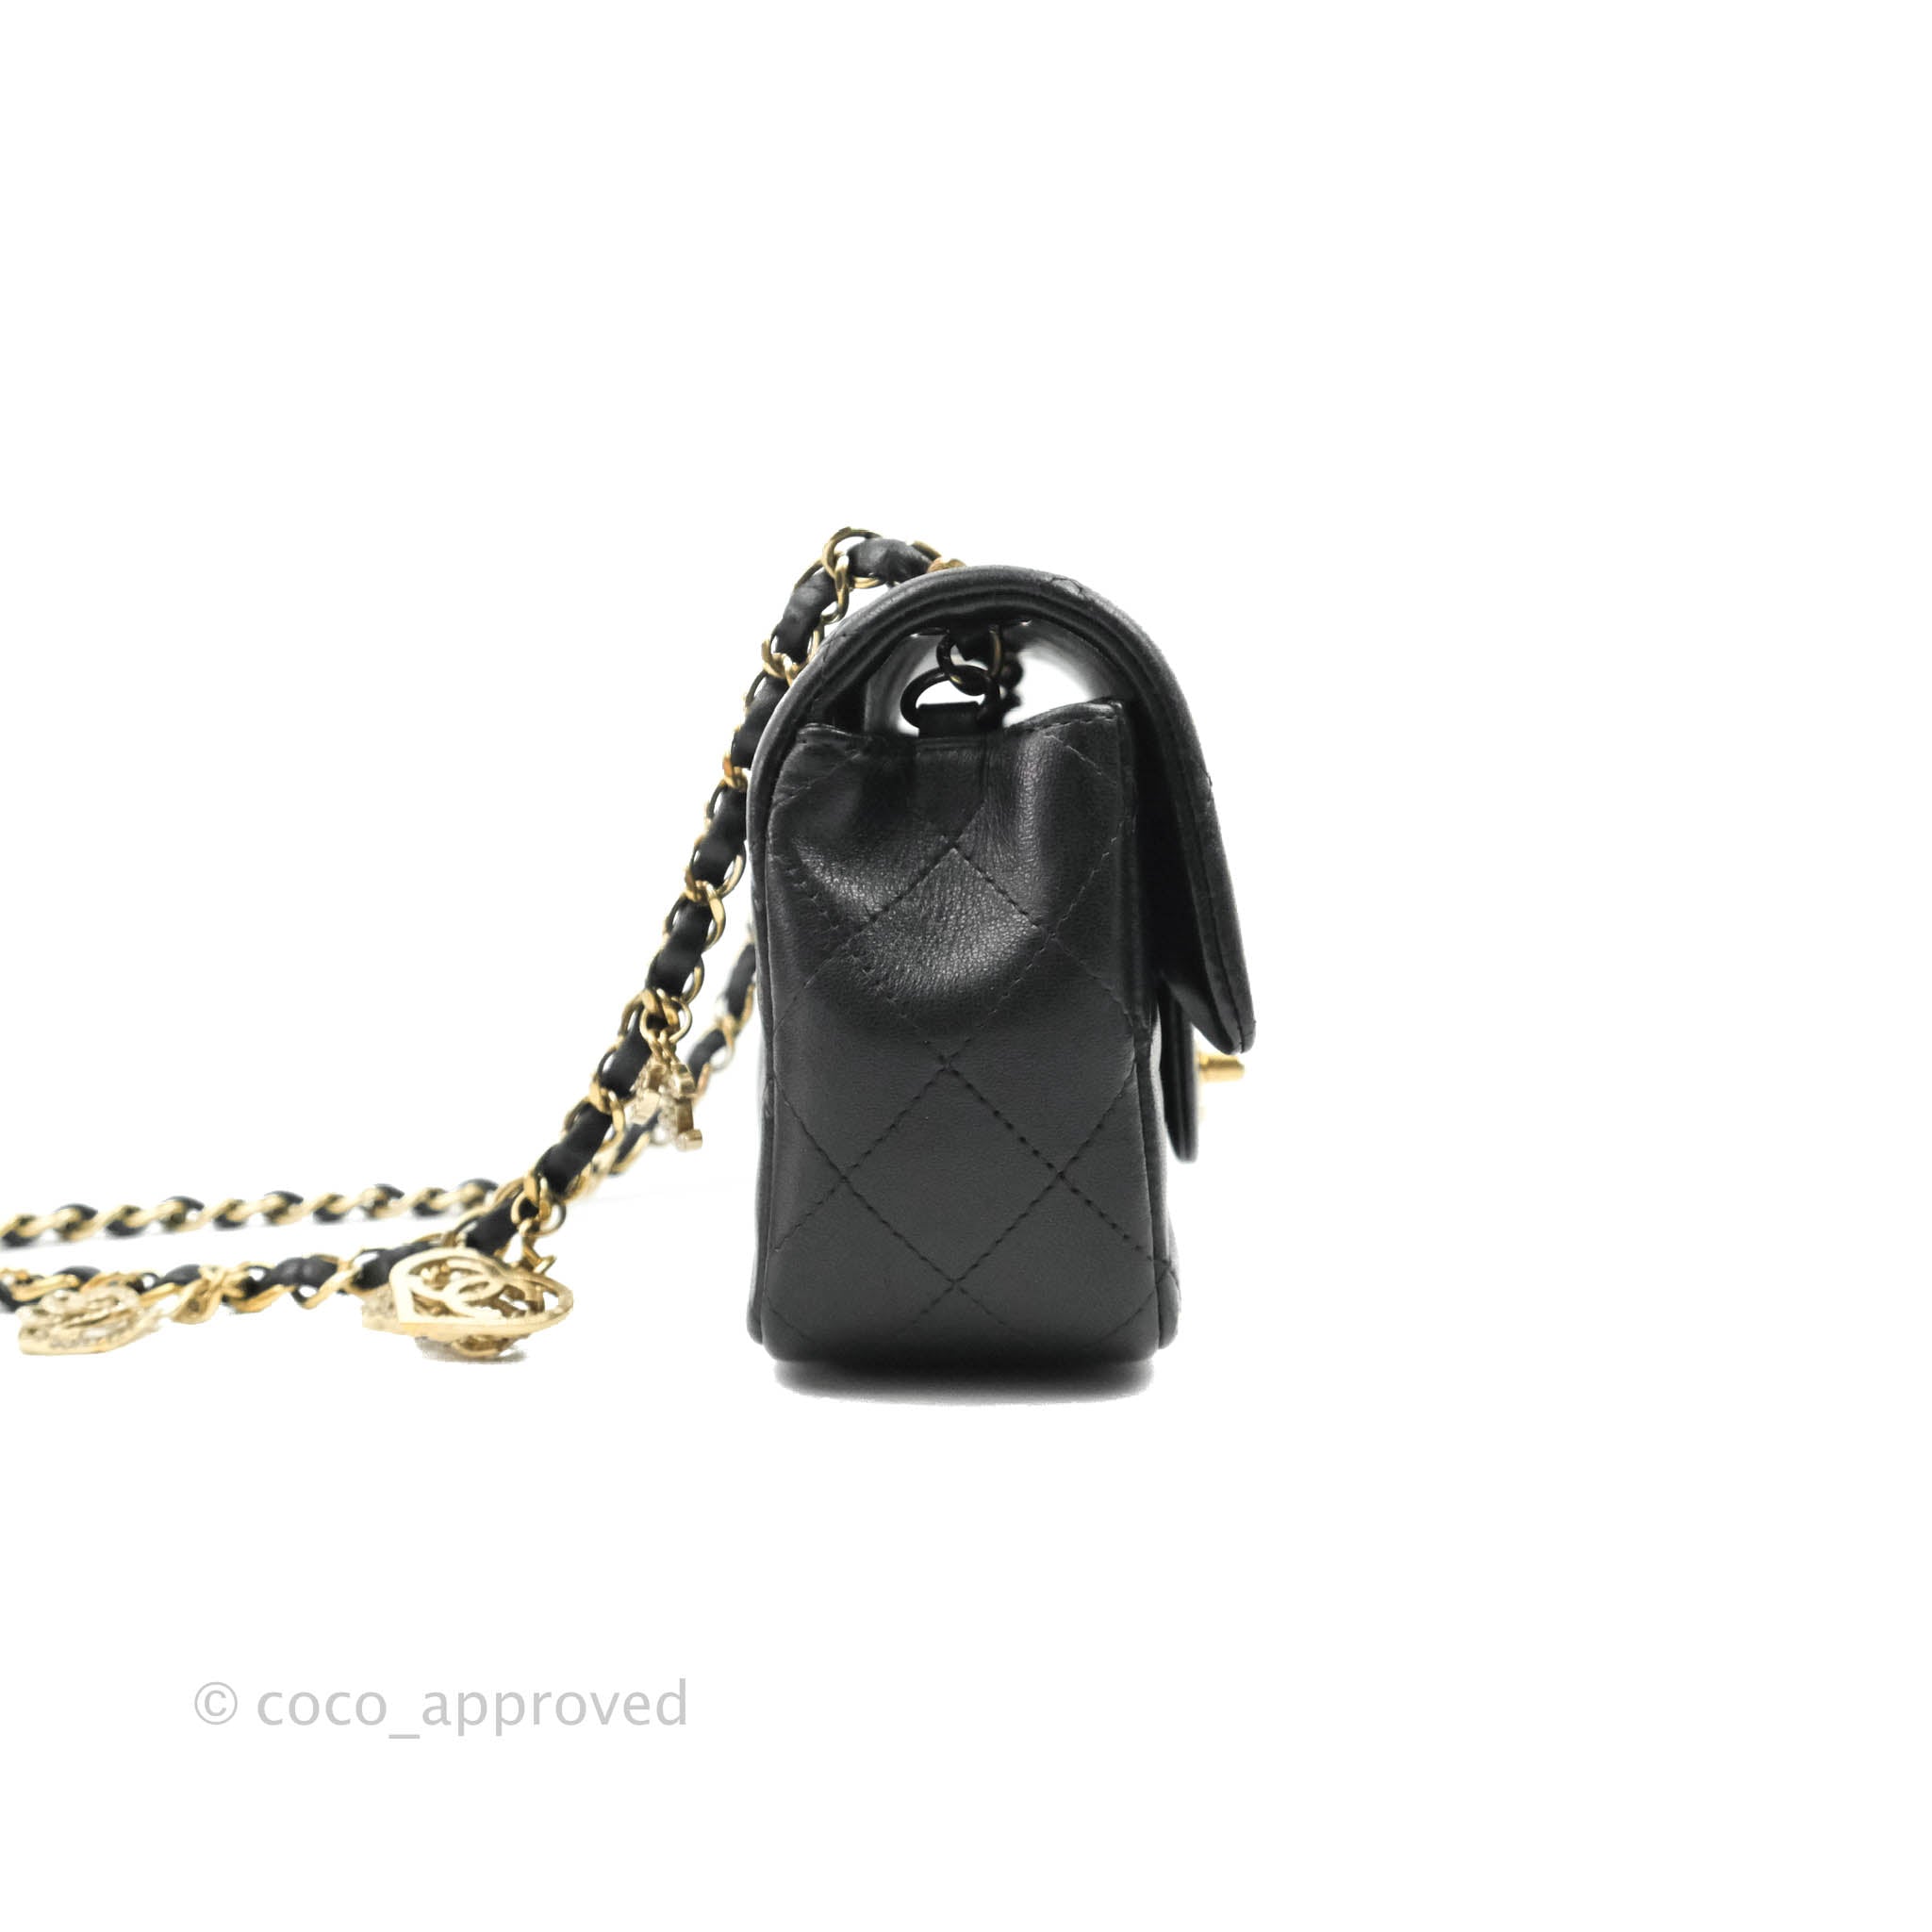 black and gold chanel purse